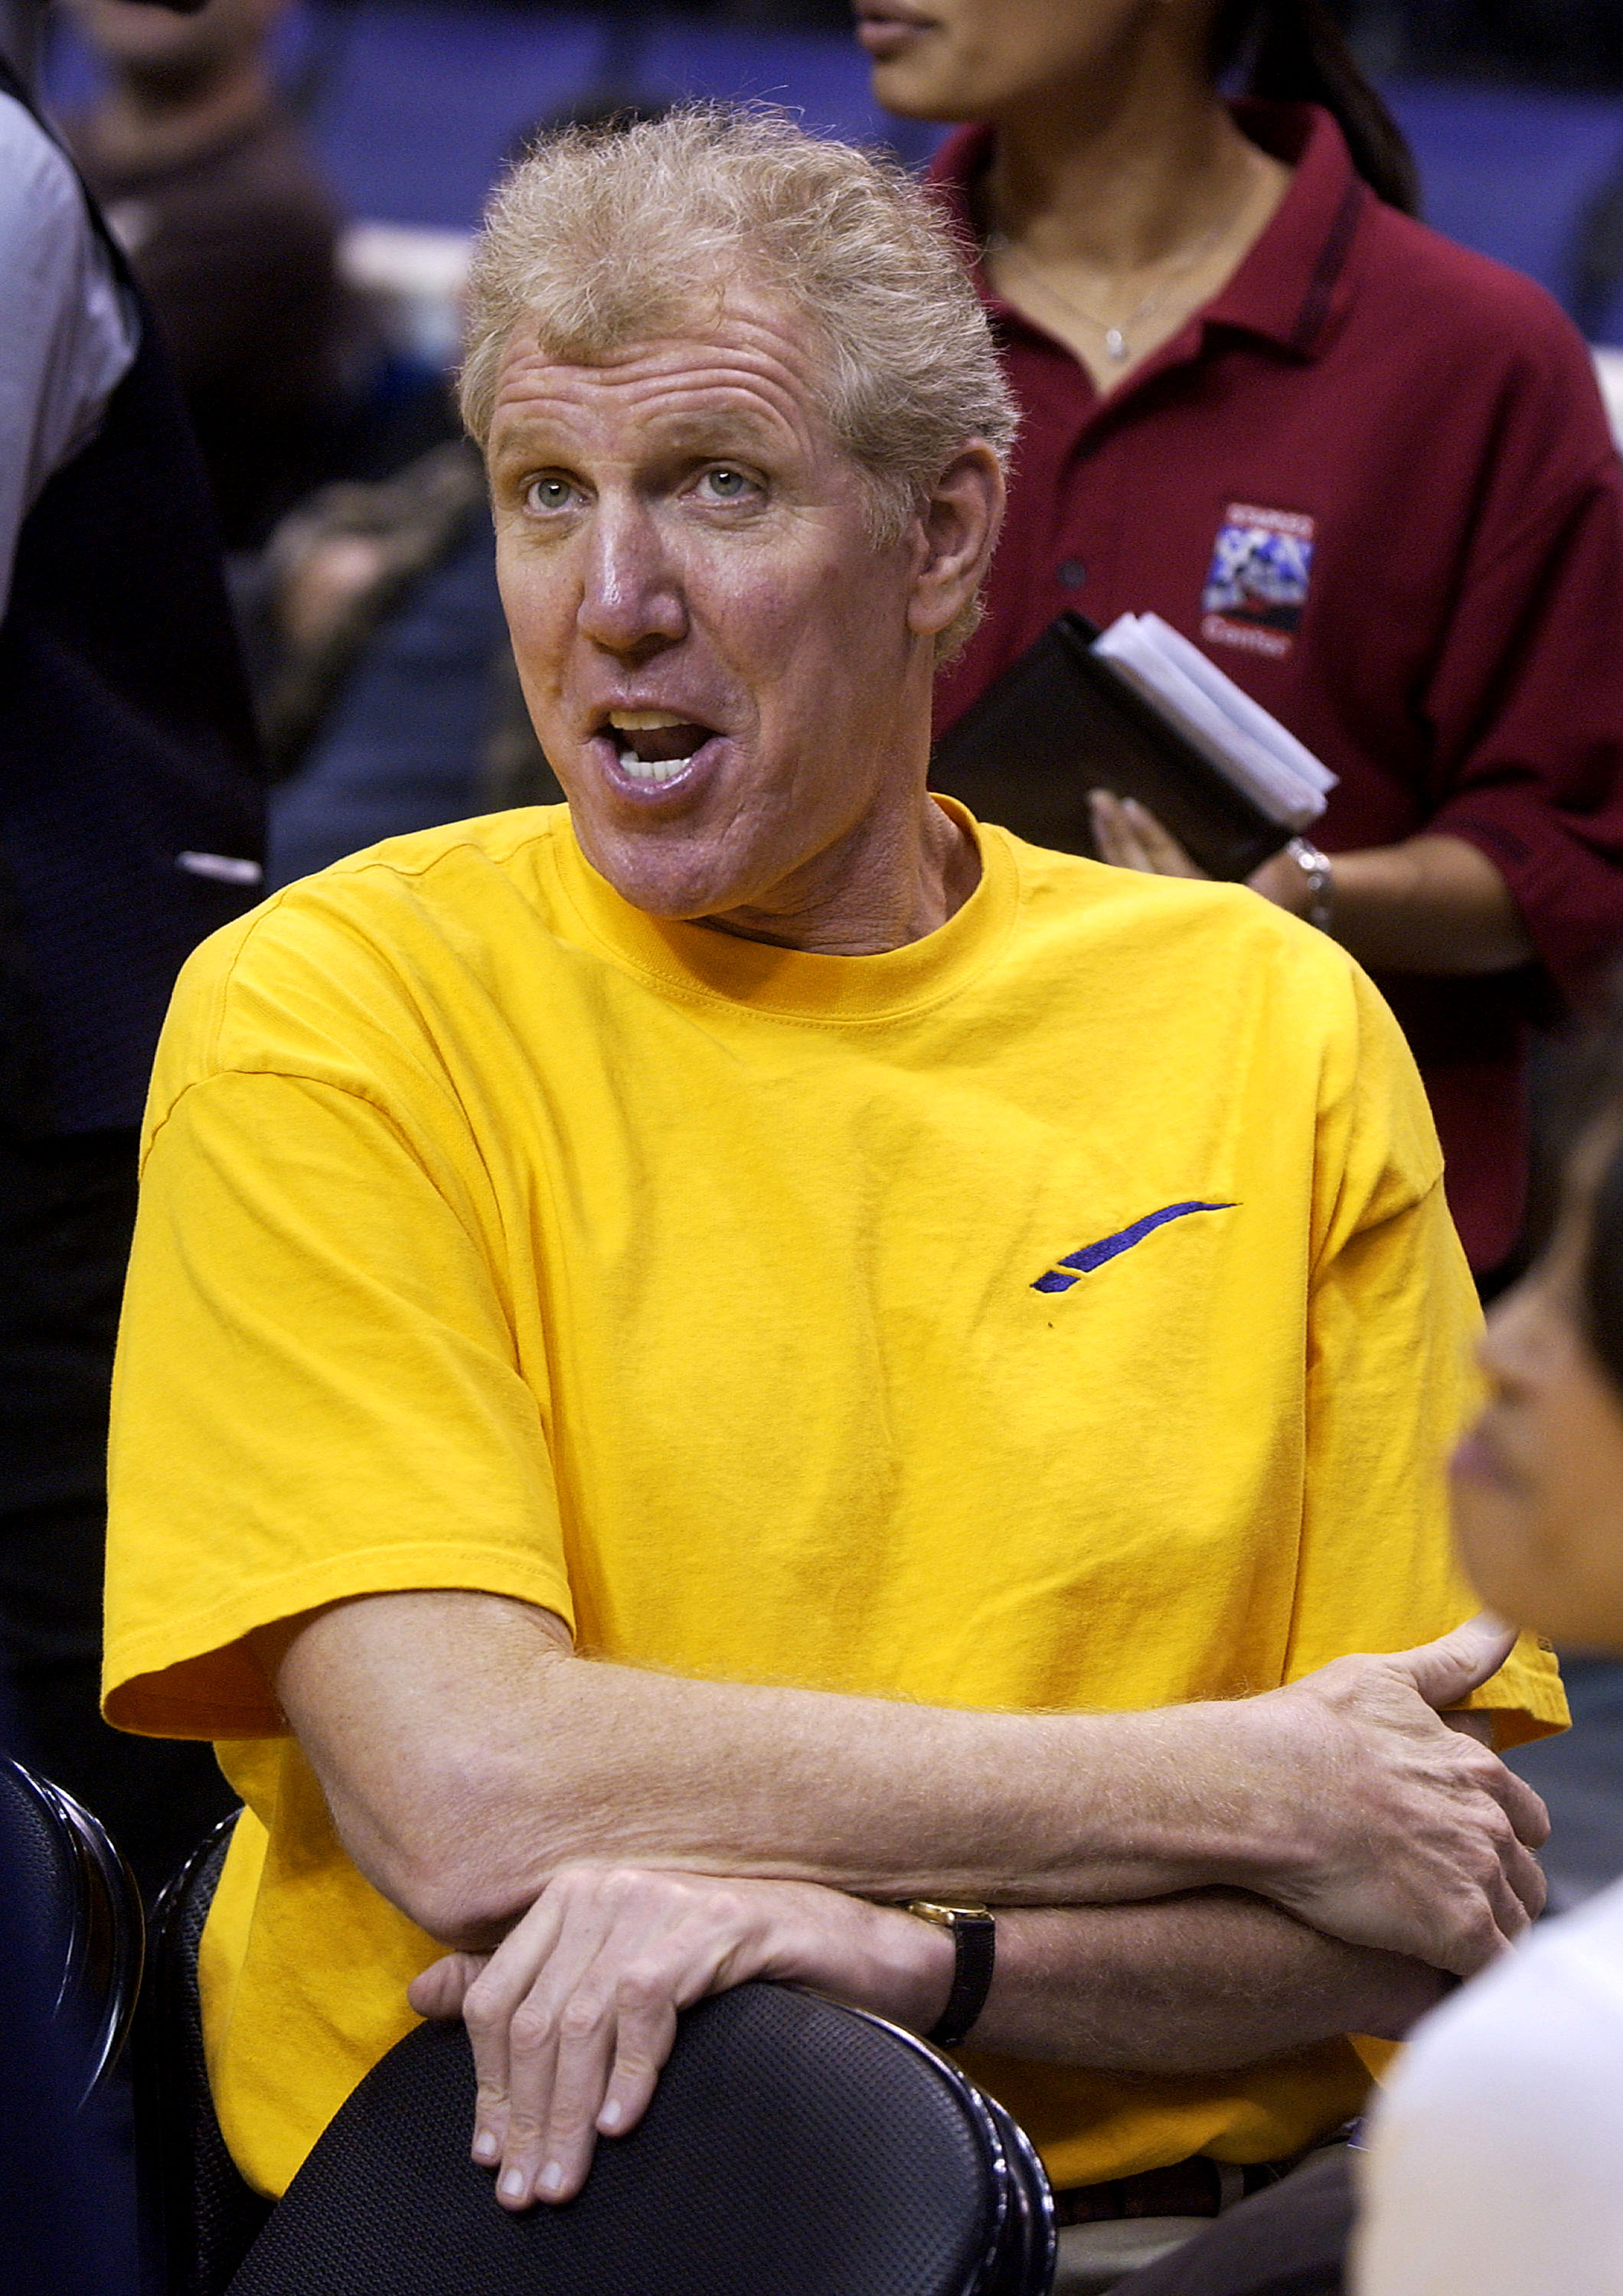 LOS ANGELES, CA - NOVEMBER 2:  Former basketball player Bill Walton attends the game between the Los Angeles Lakers and the Golden State Warriors on November 2, 2003 a the Staples Center in Los Angeles, California.  (Photo by Vince Bucci/Getty Images)